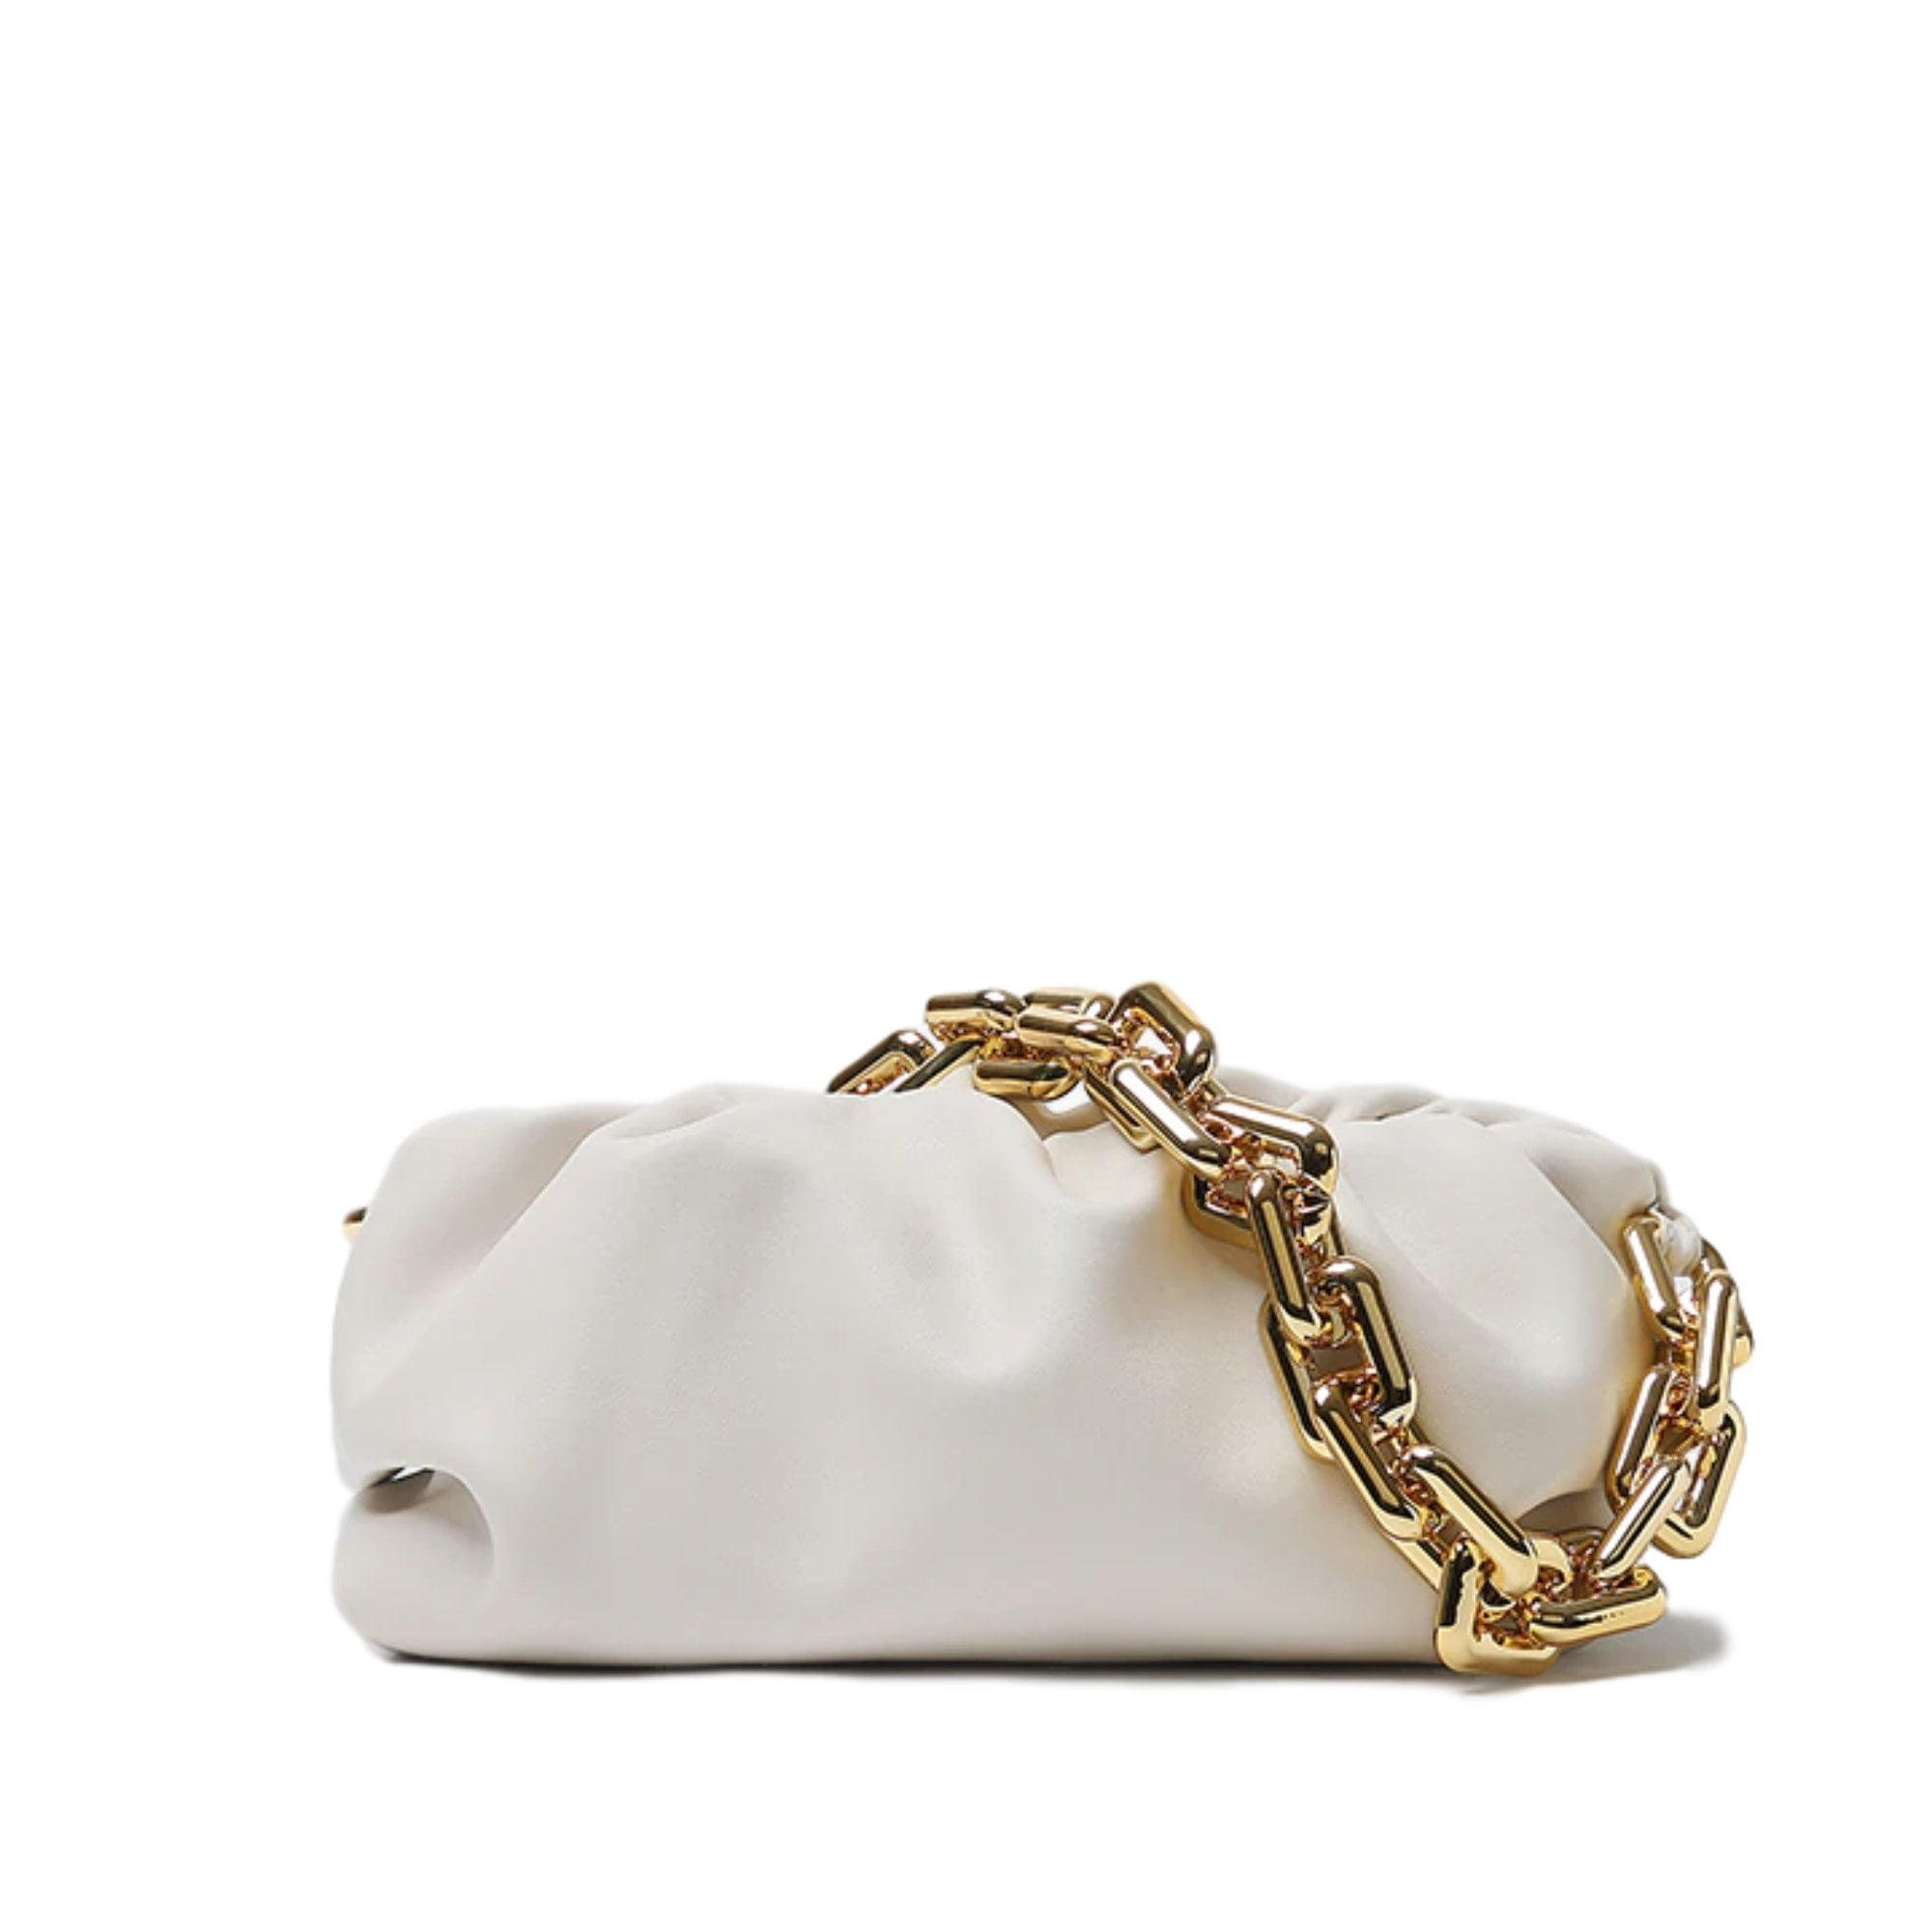 expouch Women Cloud Bag Slouchy Clutch Ruched Purse Evening Handbag with Gold Chain Shoulder Bag